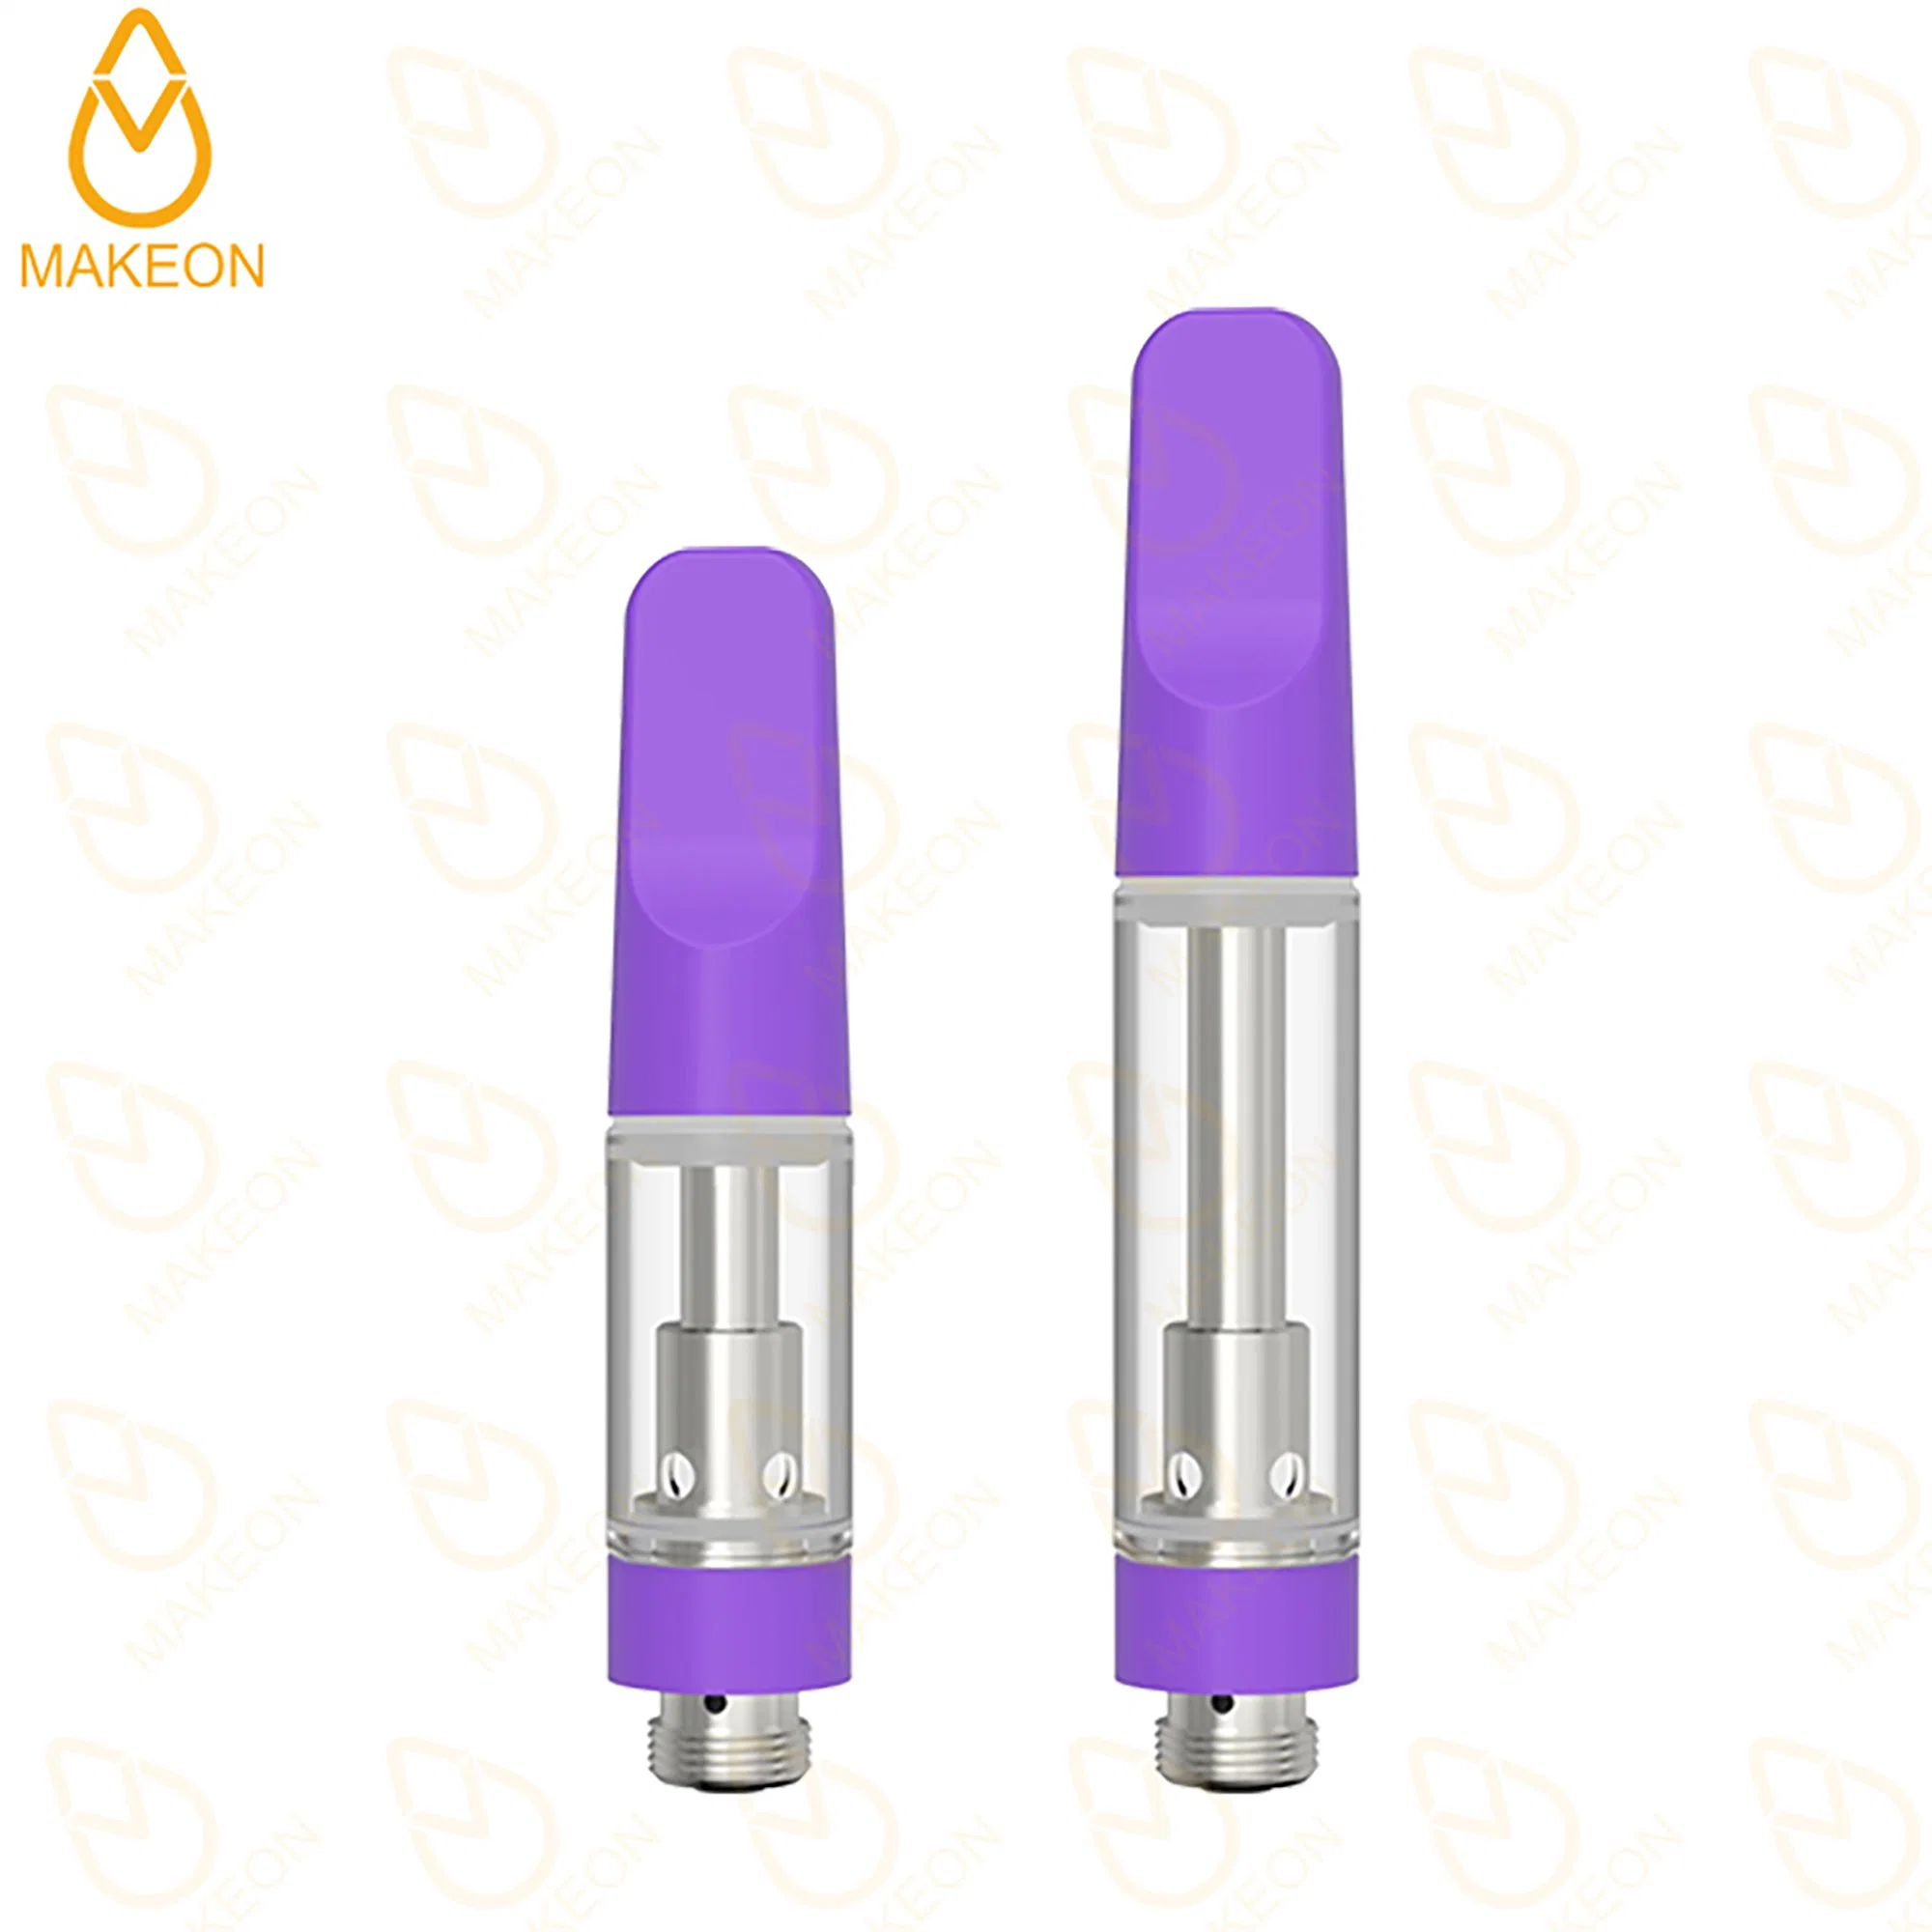 High Quality 510thread Cartridge All Glass Tube Atomizer Ceramic Coil Vapoizer Customize OEM Package Box